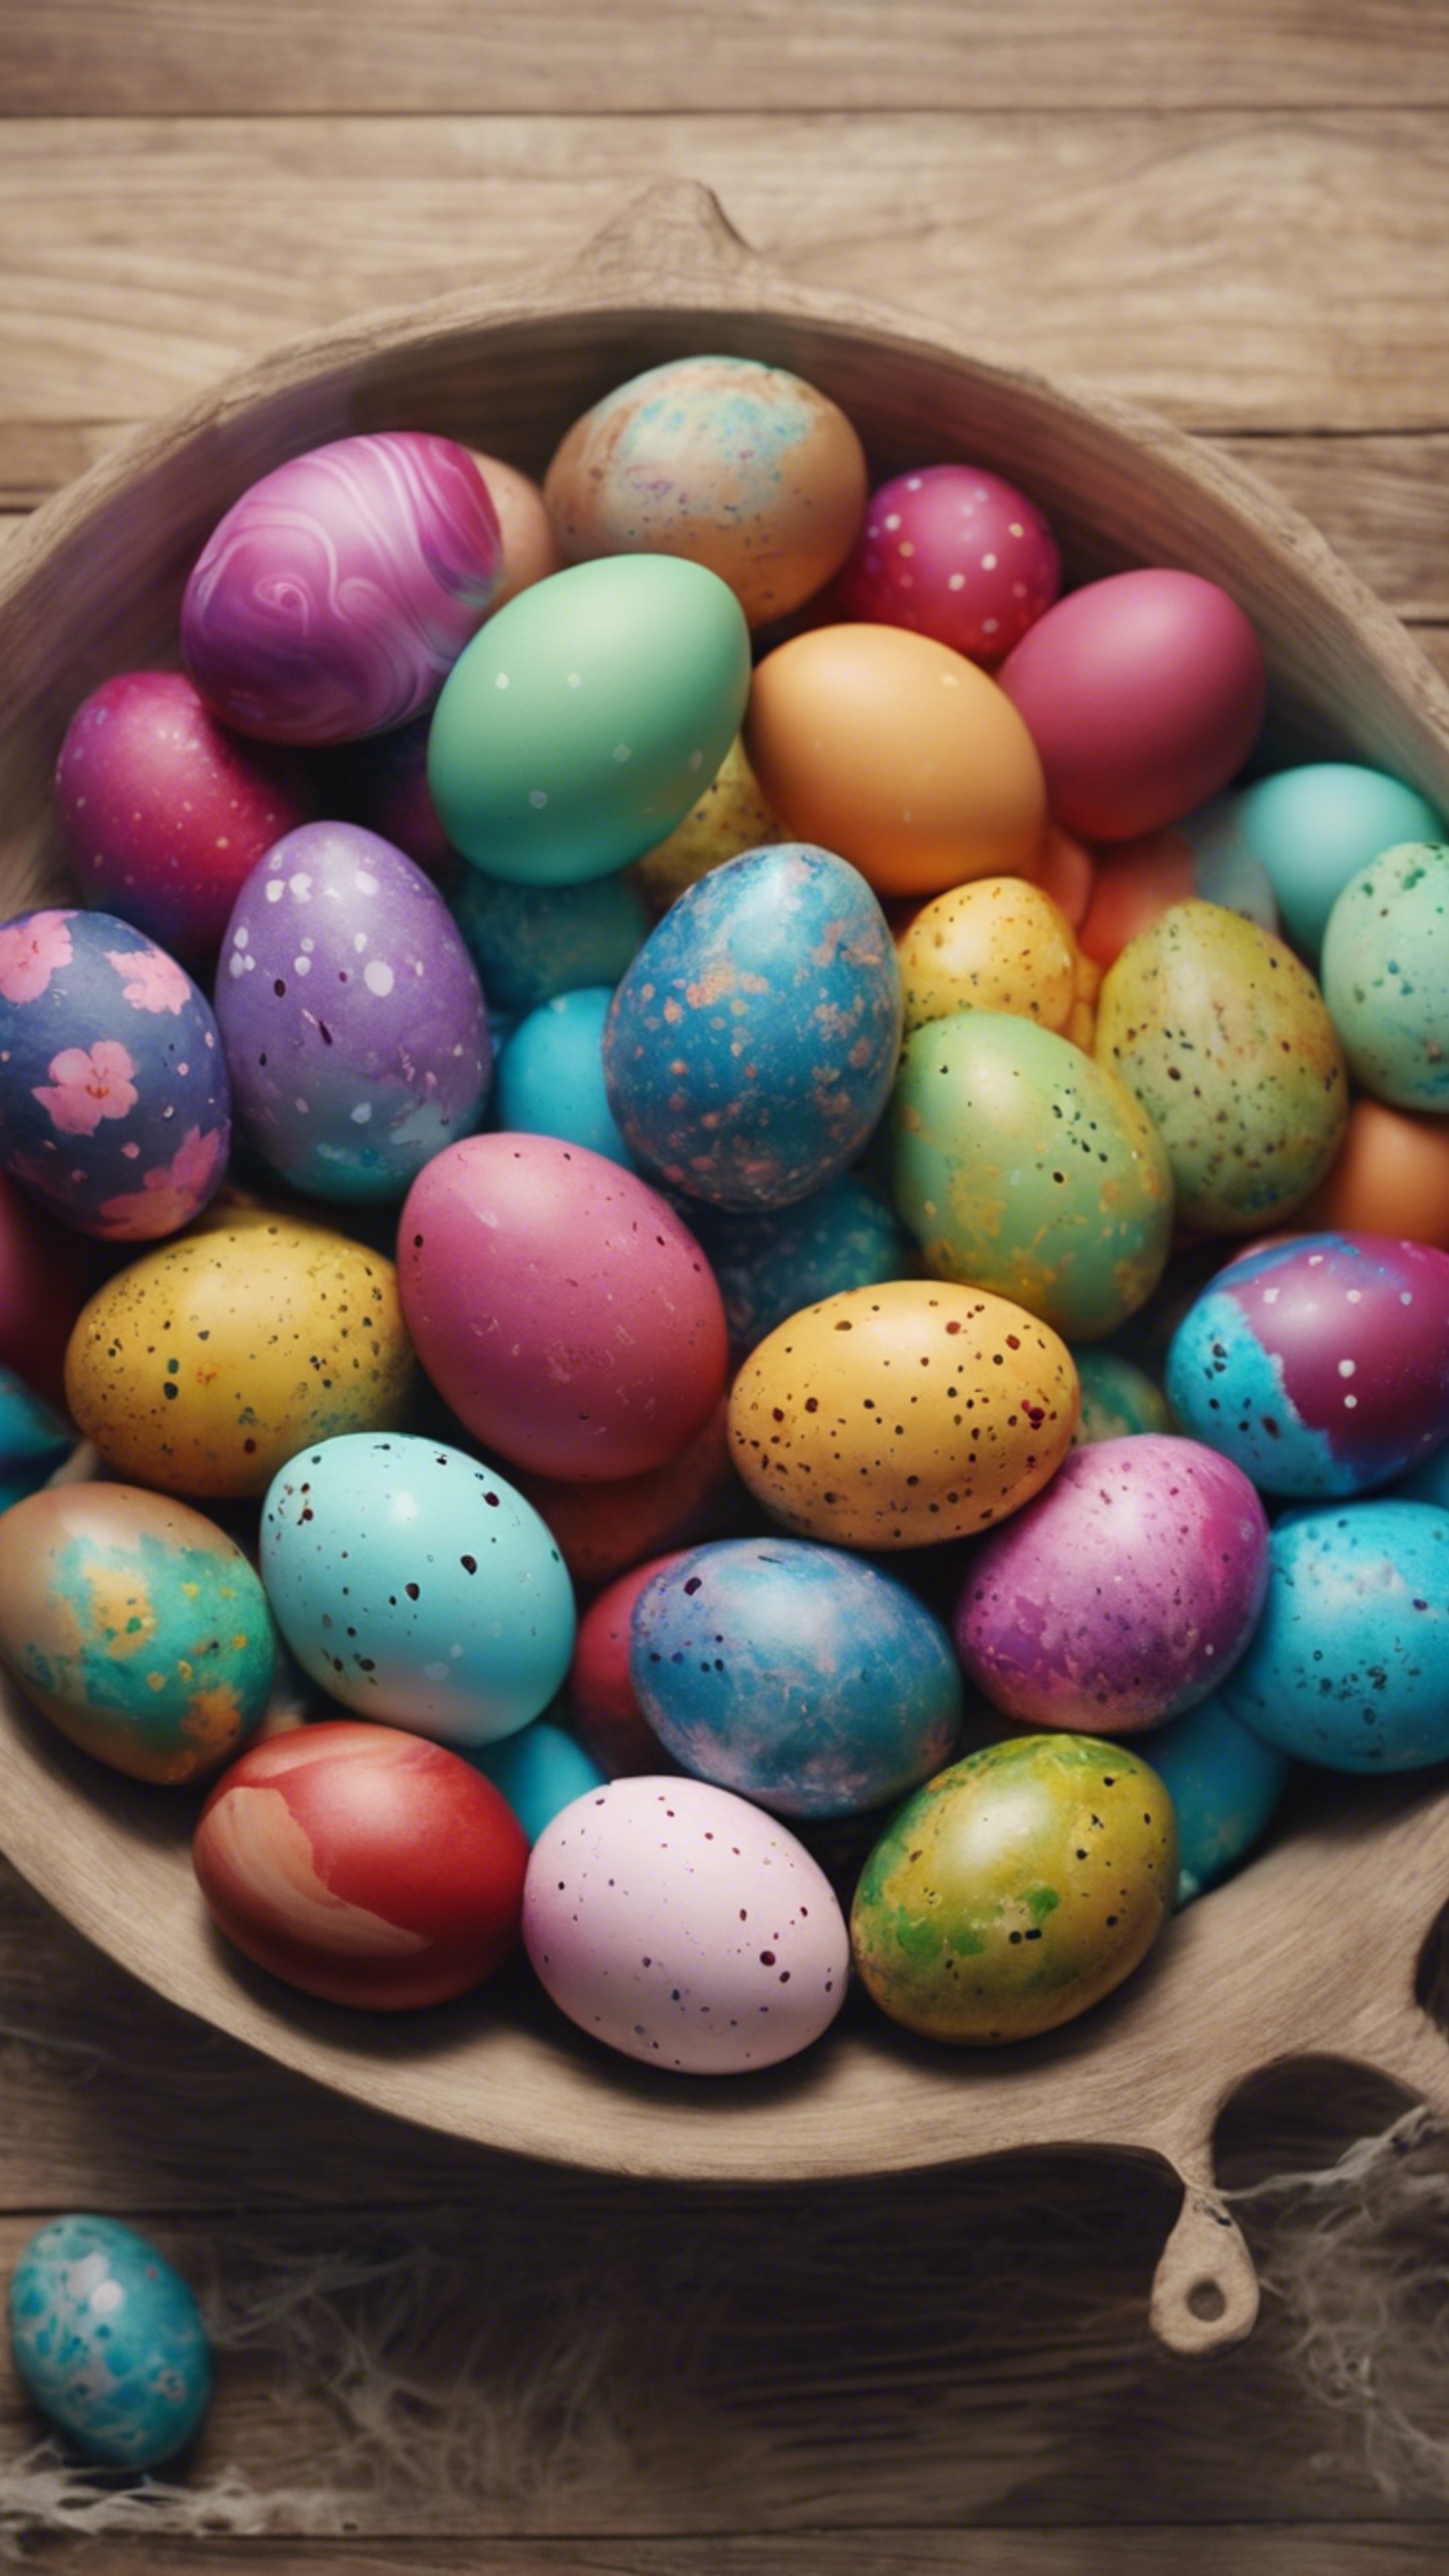 Steaming pot of colorful dyed Easter eggs with speckled designs, on a wooden table. Wallpaper[84cae079e5a44b089b64]